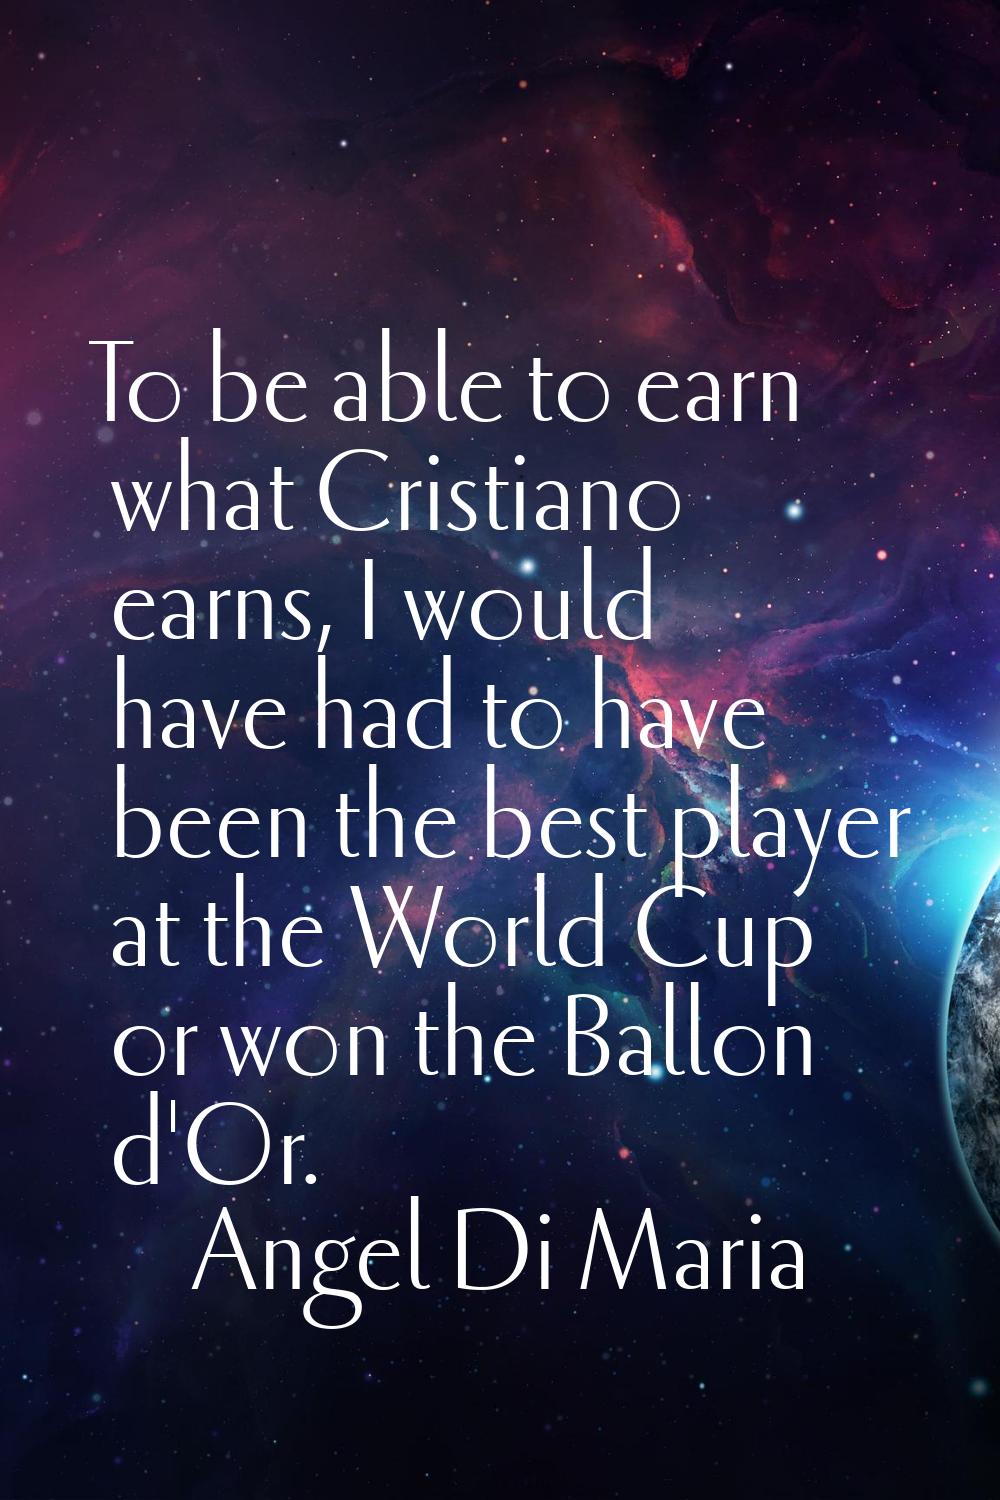 To be able to earn what Cristiano earns, I would have had to have been the best player at the World